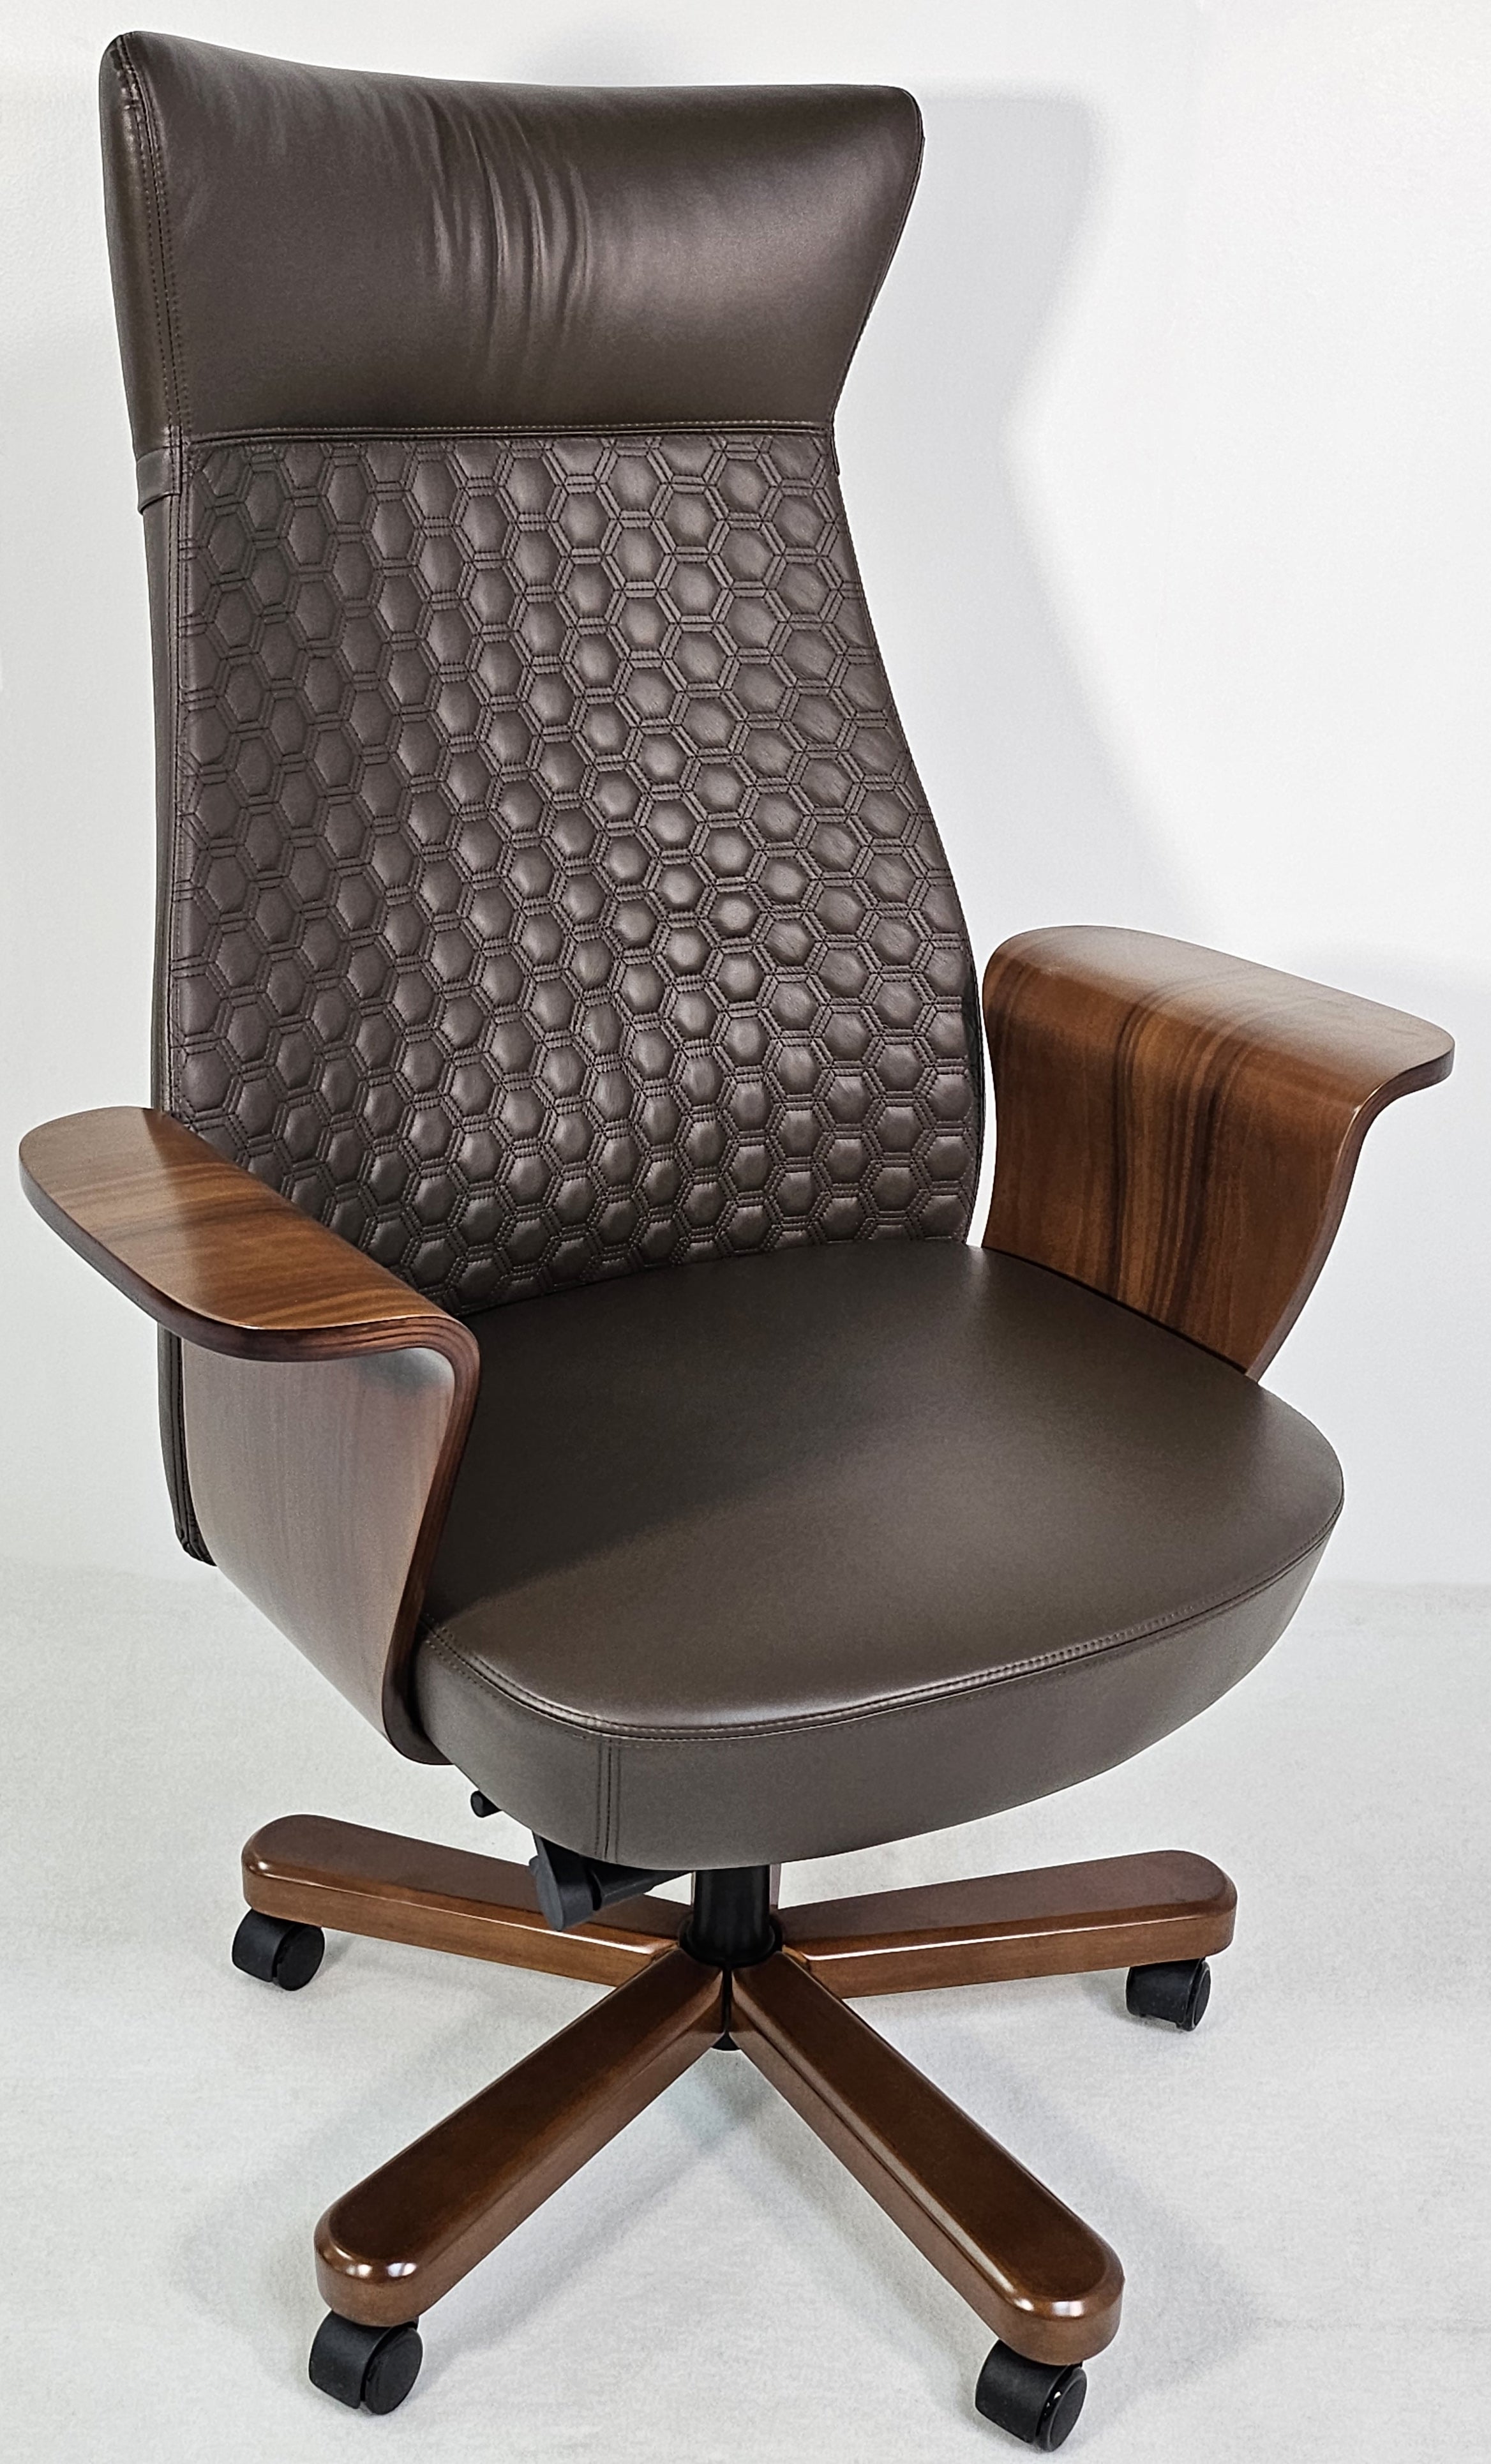 Modern Genuine Brown Leather High Back Office Chair with Hexagonal Design - 6084HL